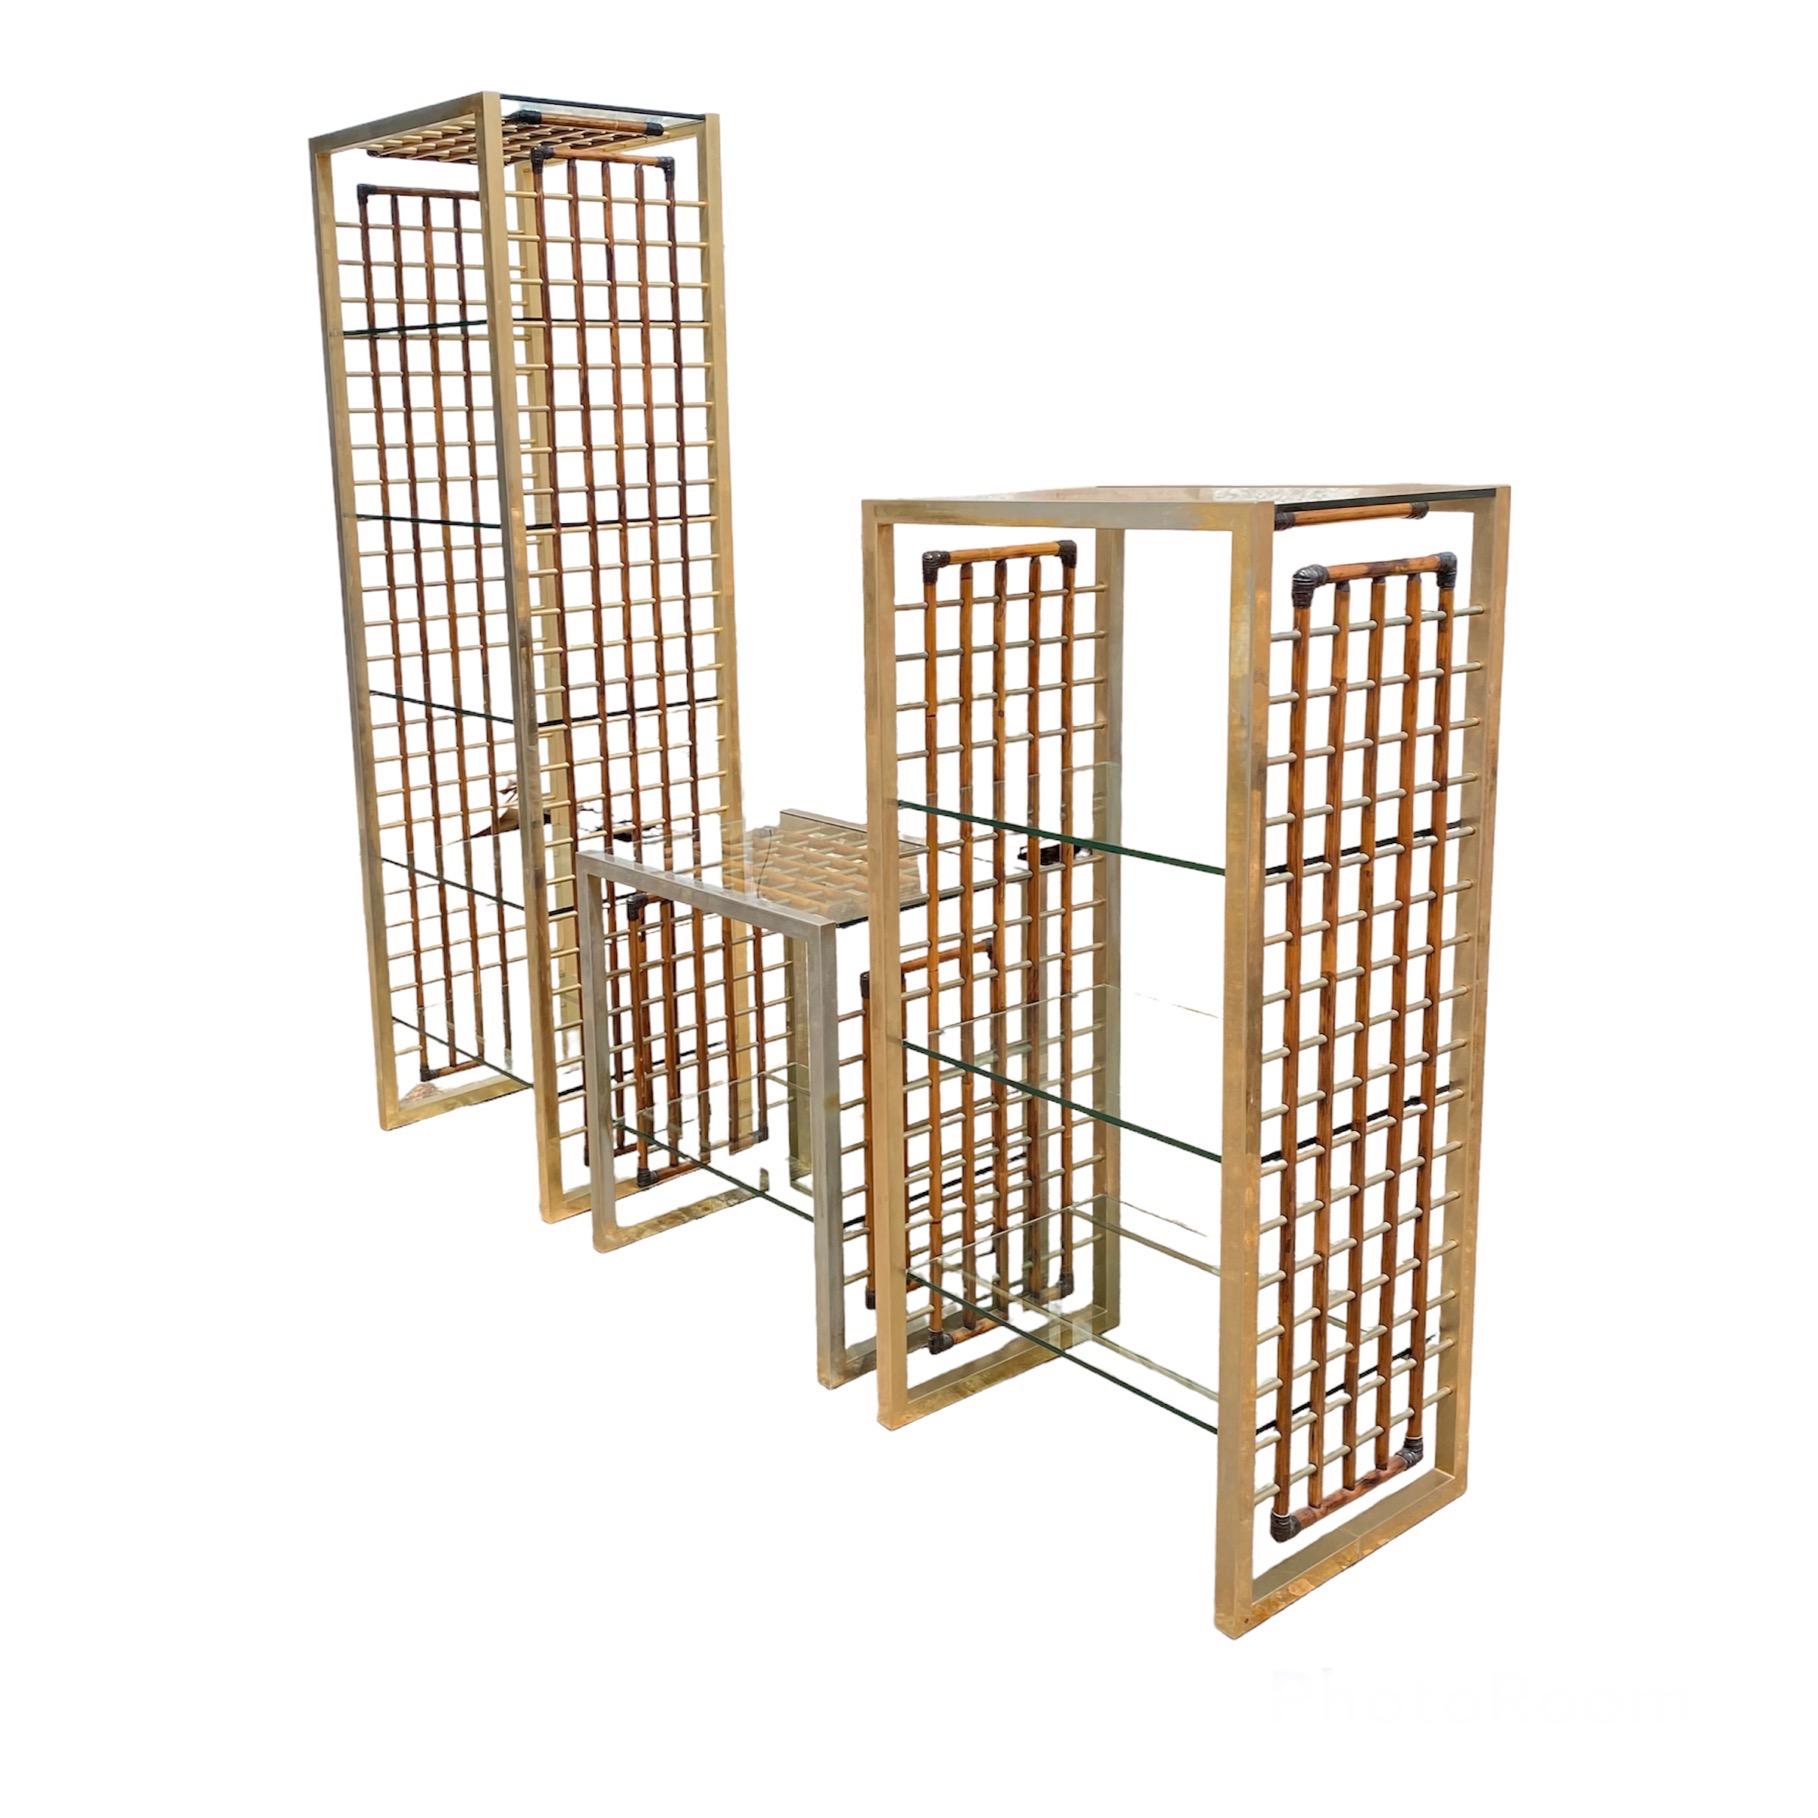 Stunning set of 3 bookcase or glass cabinet modules designed by Alberto Smania and produced by the homonymous company in Italy in 1967.
The peculiarity of these objects is they are made with noble materials such as brass, leather in the corners and